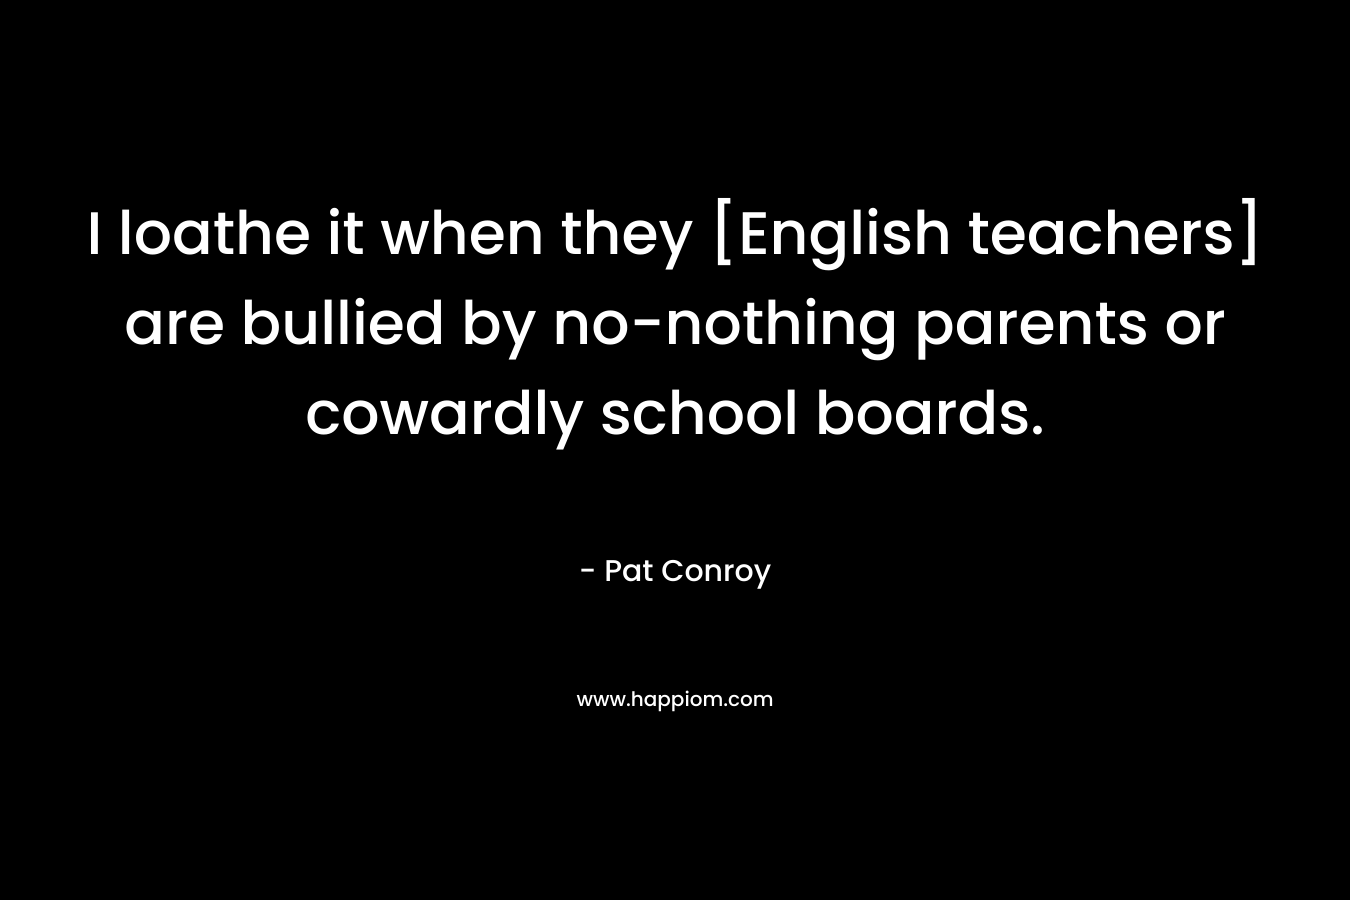 I loathe it when they [English teachers] are bullied by no-nothing parents or cowardly school boards.